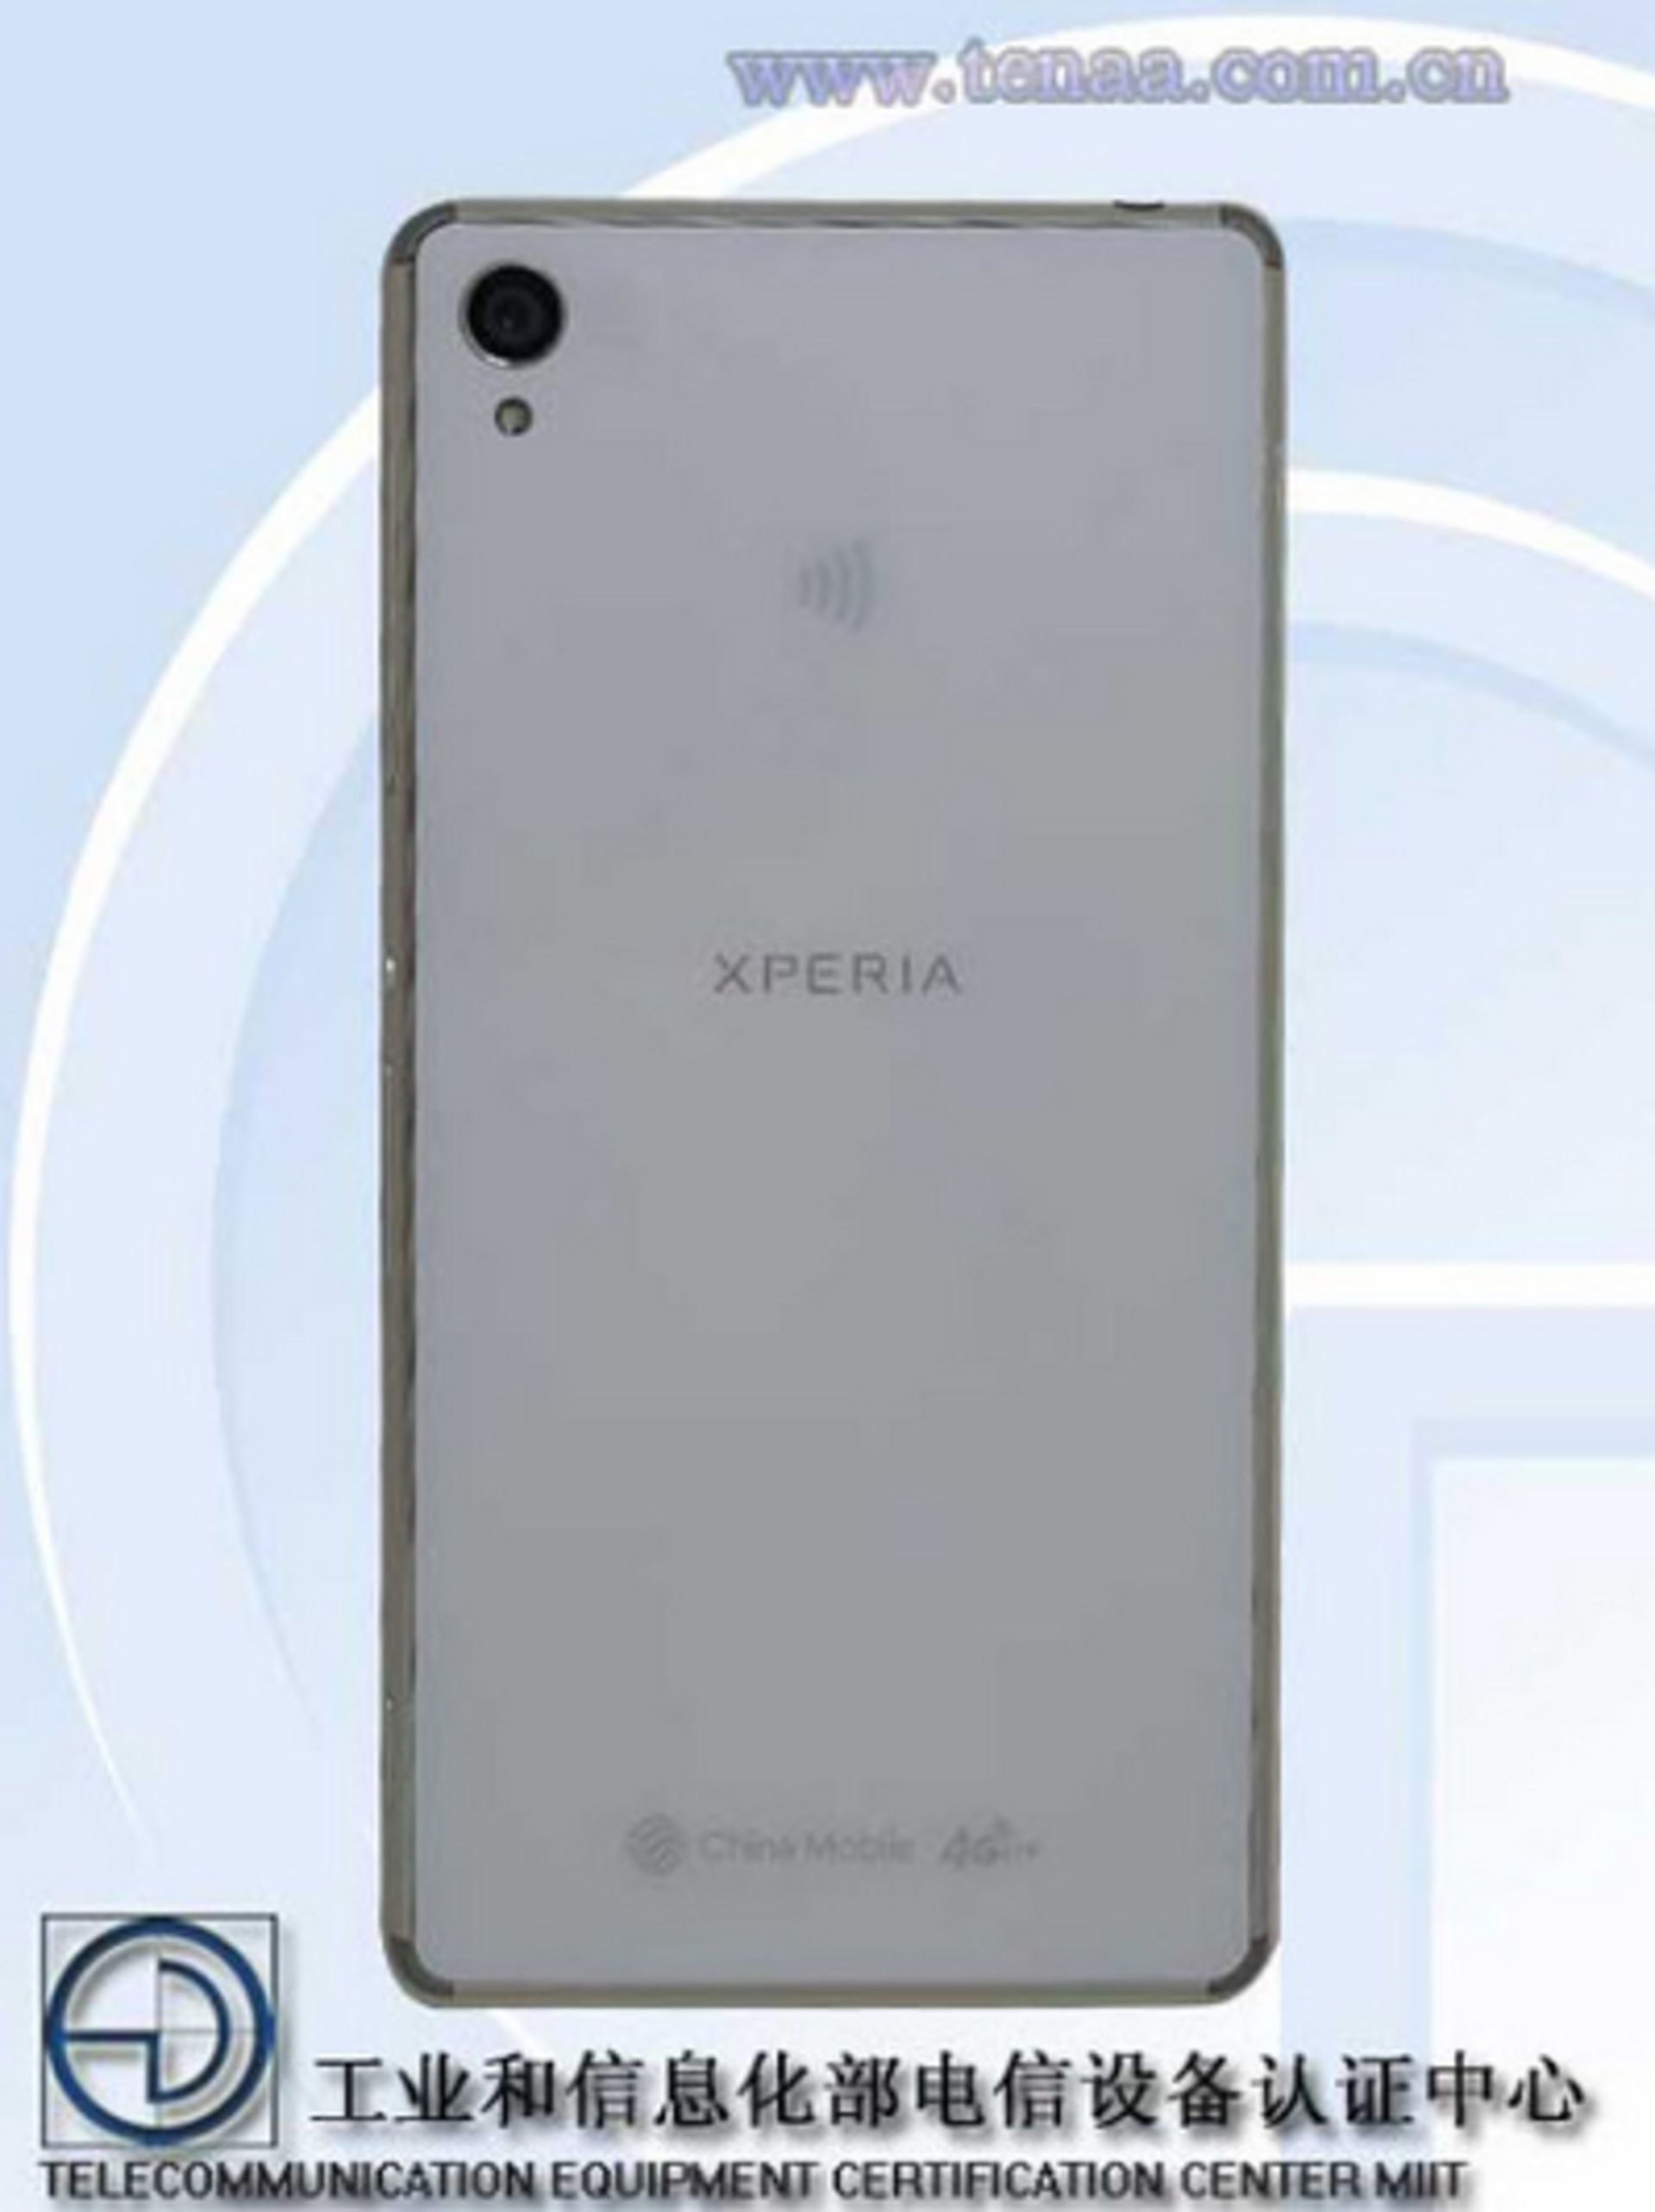 The-Sony-Xperia-Z3-receives-TENNA-certification 4